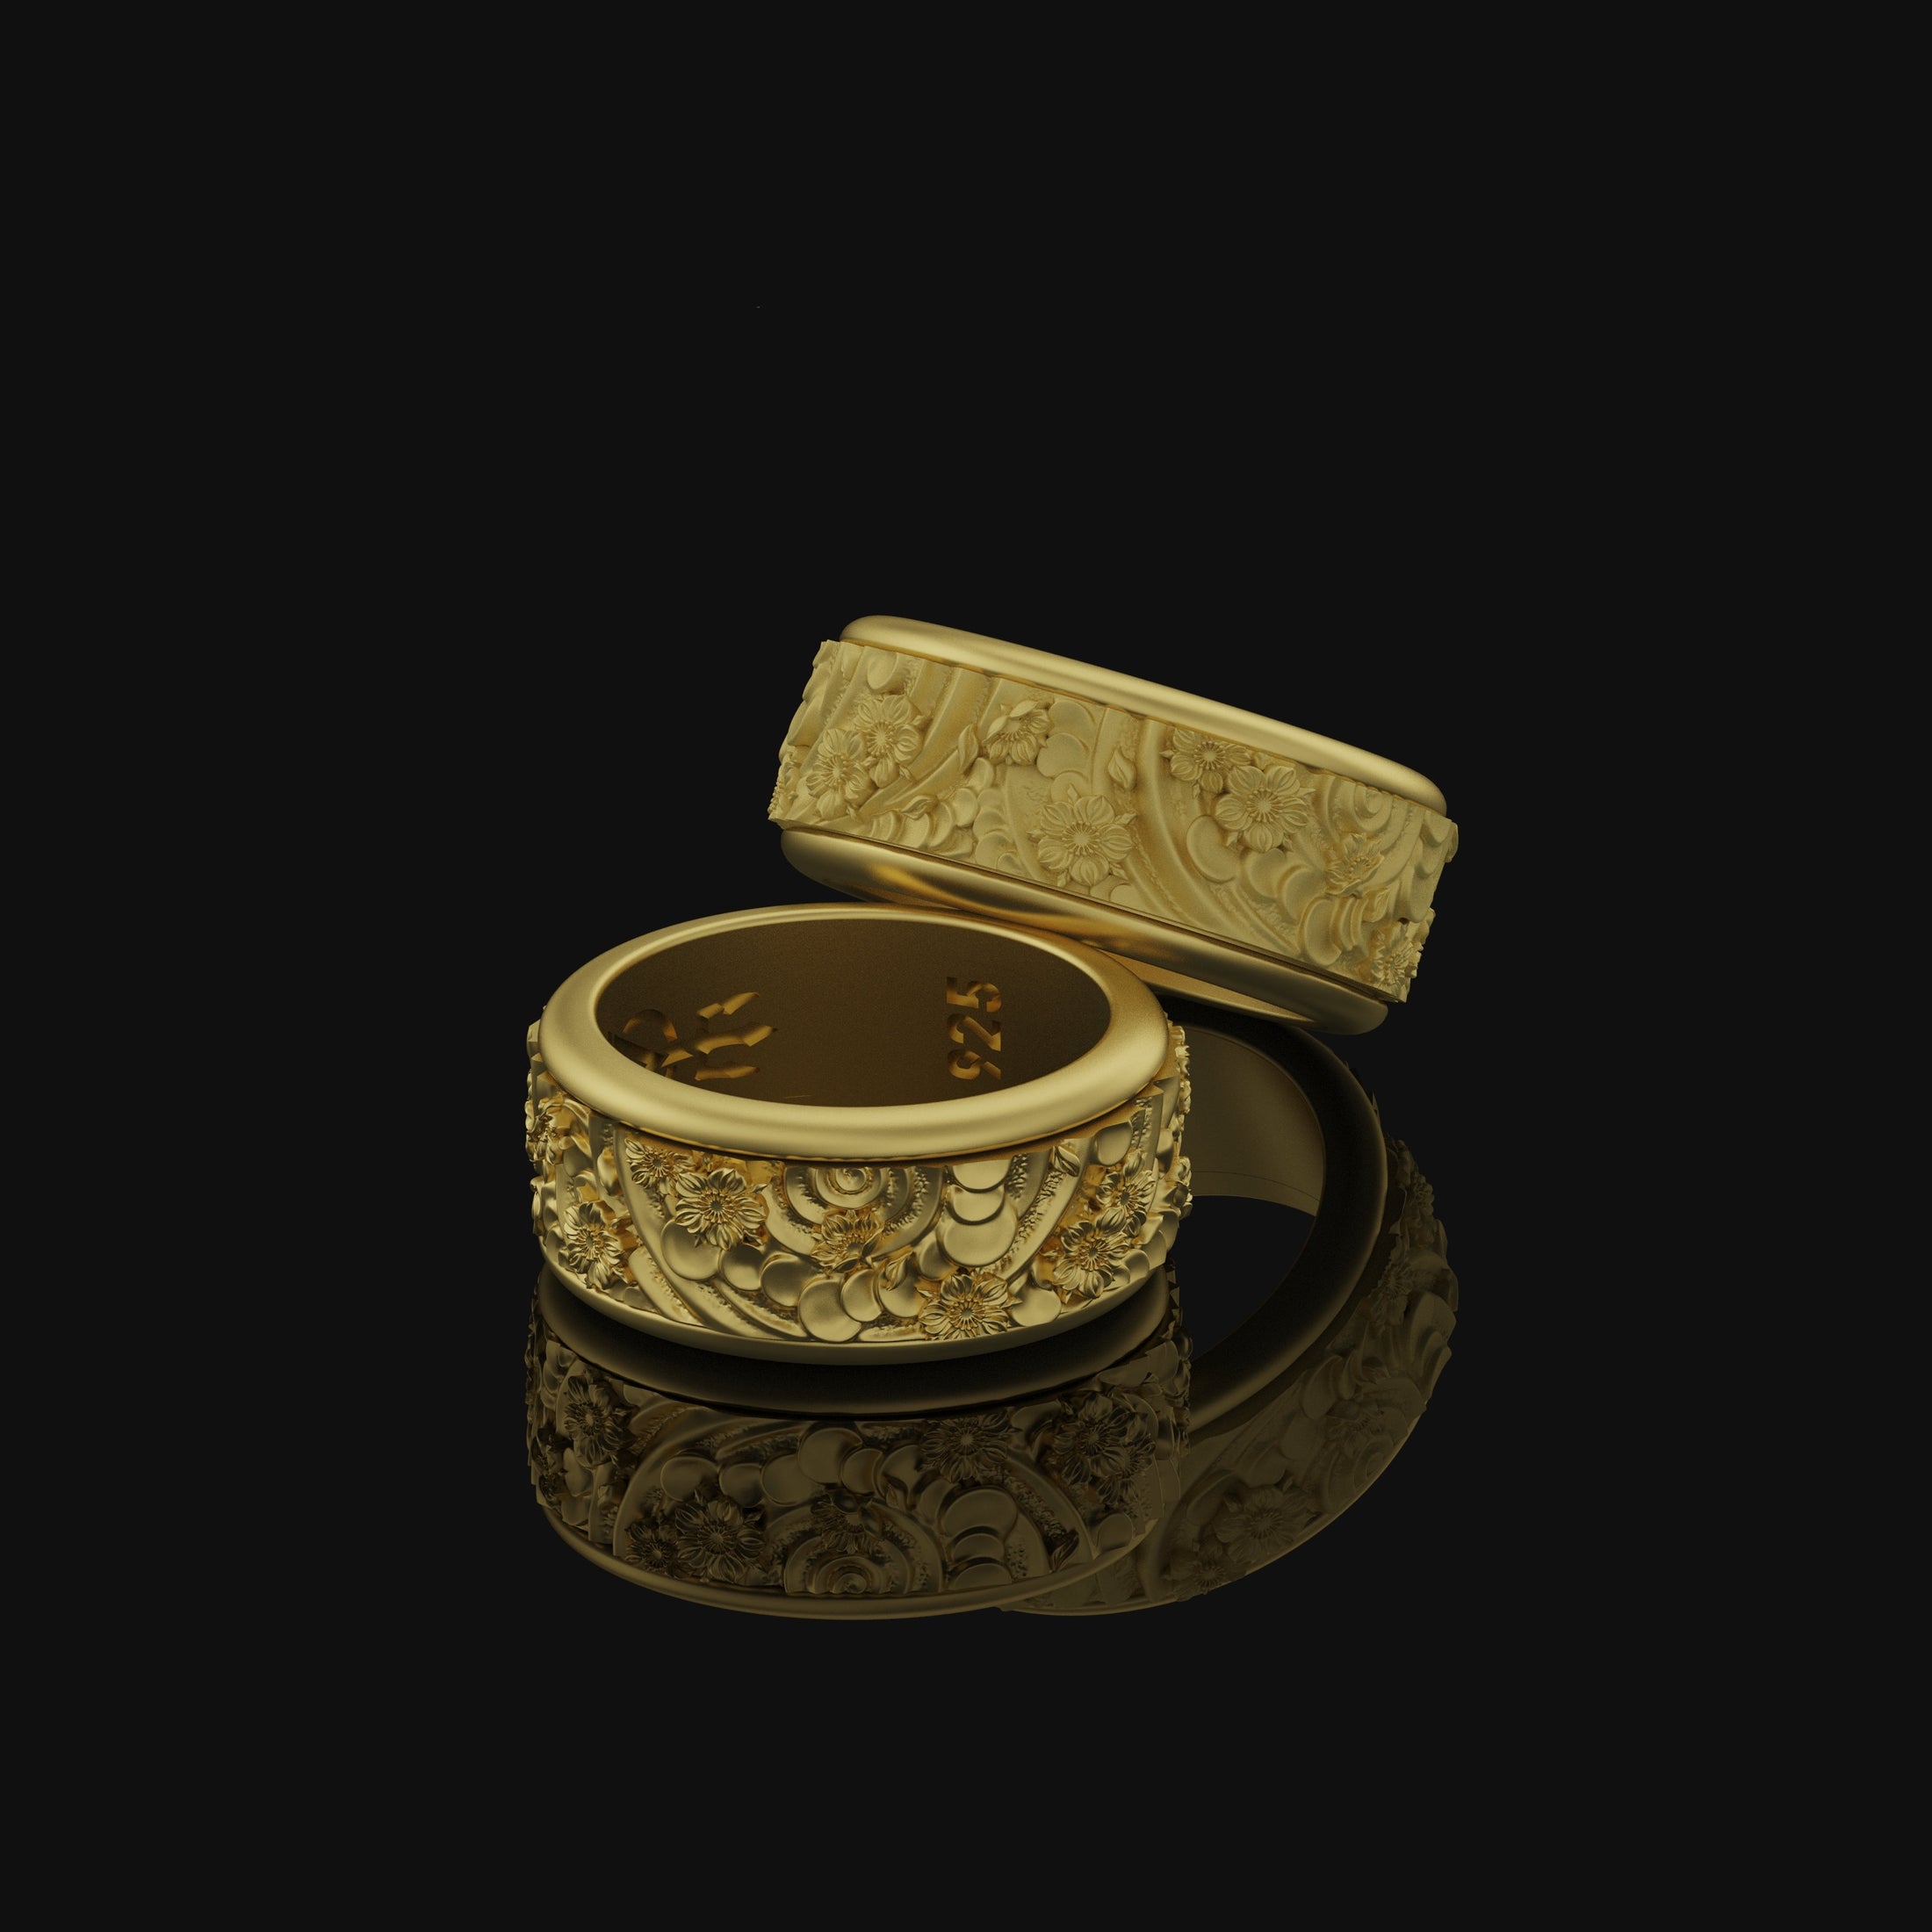 Rotating Spring Flowers Band - Engravable Gold Finish